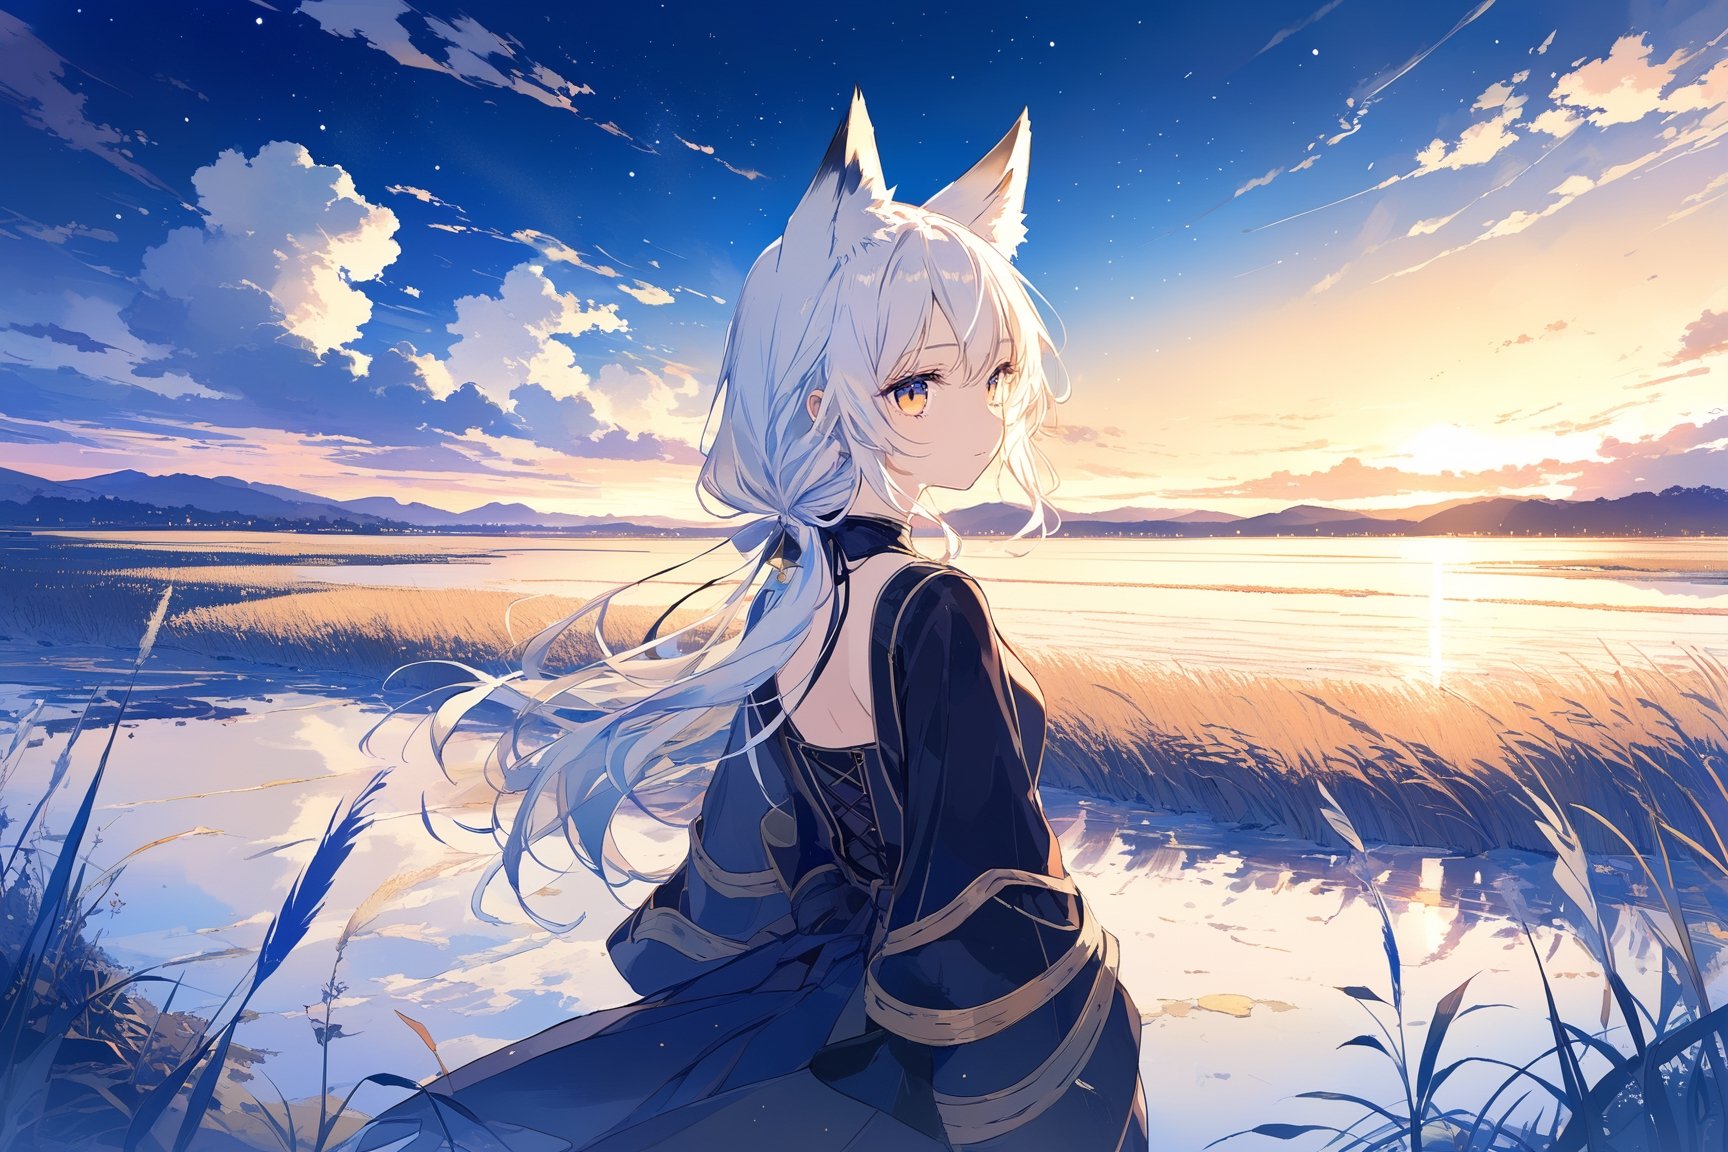 masterpiece, best quality, aethetic,The Faraway Land Beyond,Reed Sea,Sky of Day and Night Blended,The End of Time,A lovely girl,Long light white hair,fox ear,from behind,f/8,120mm,Environmental portrait,Candid,Panoramic view